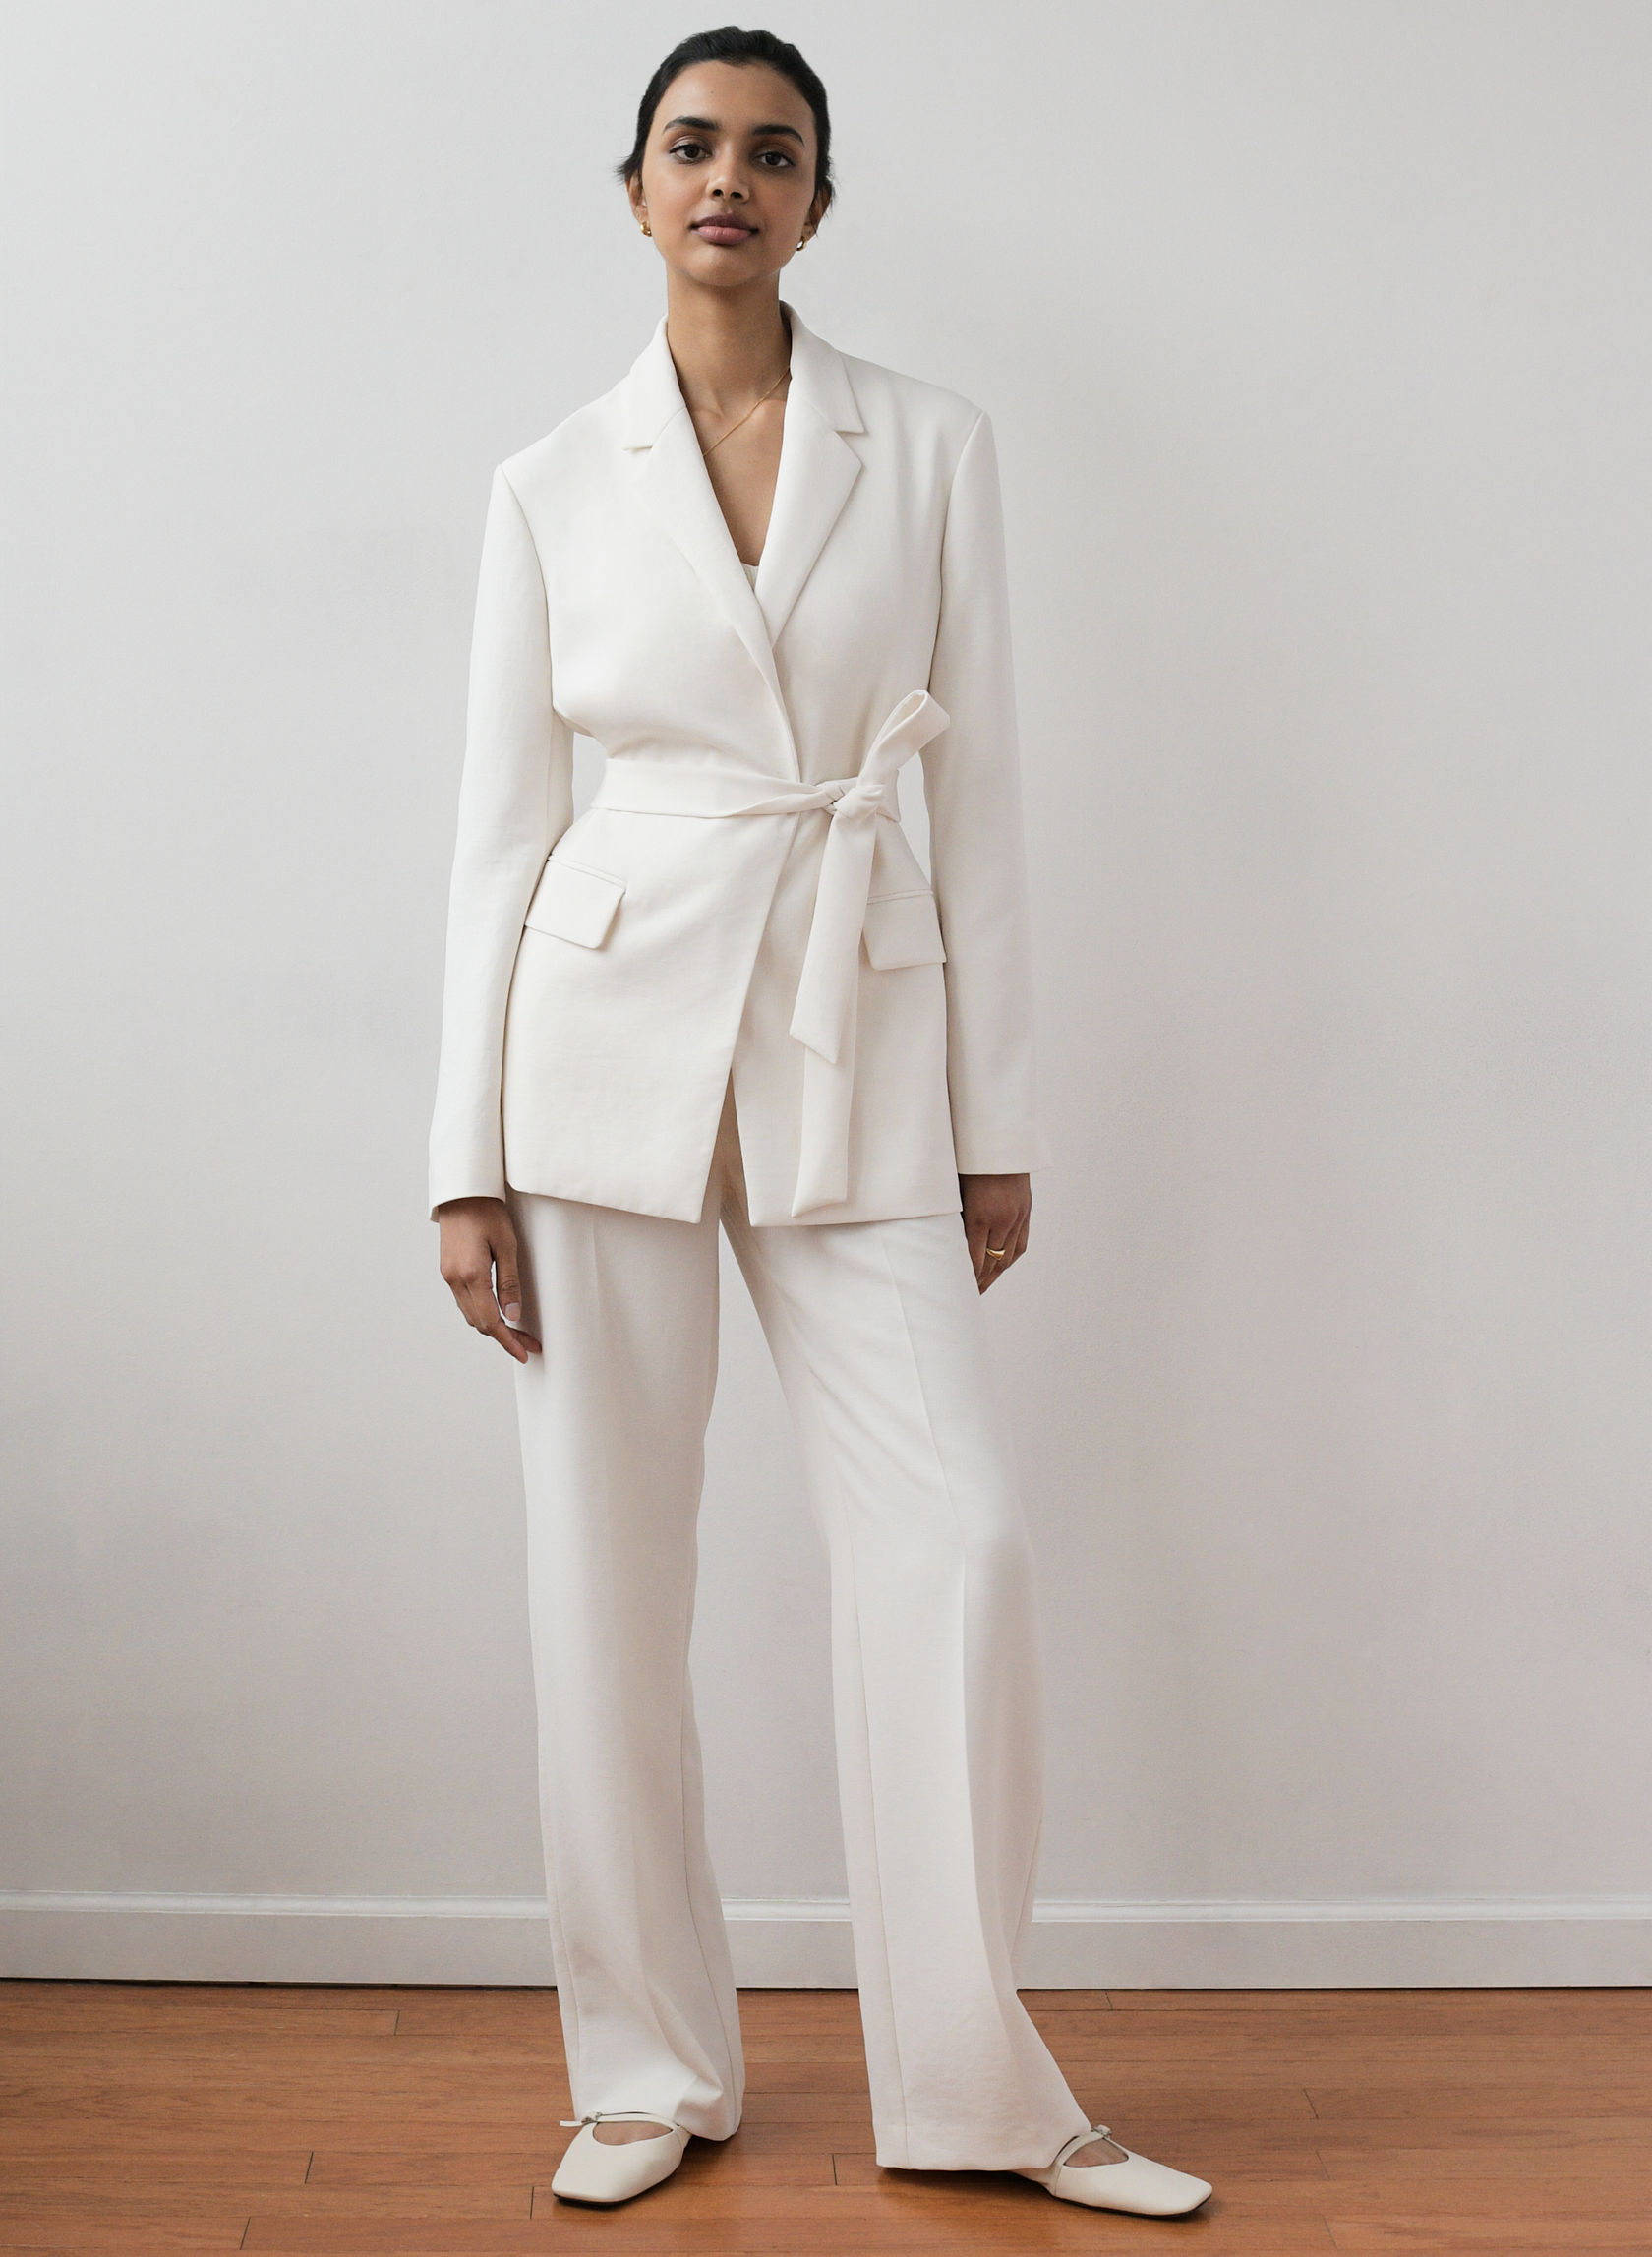 white blazer and pants courthouse wedding outfit